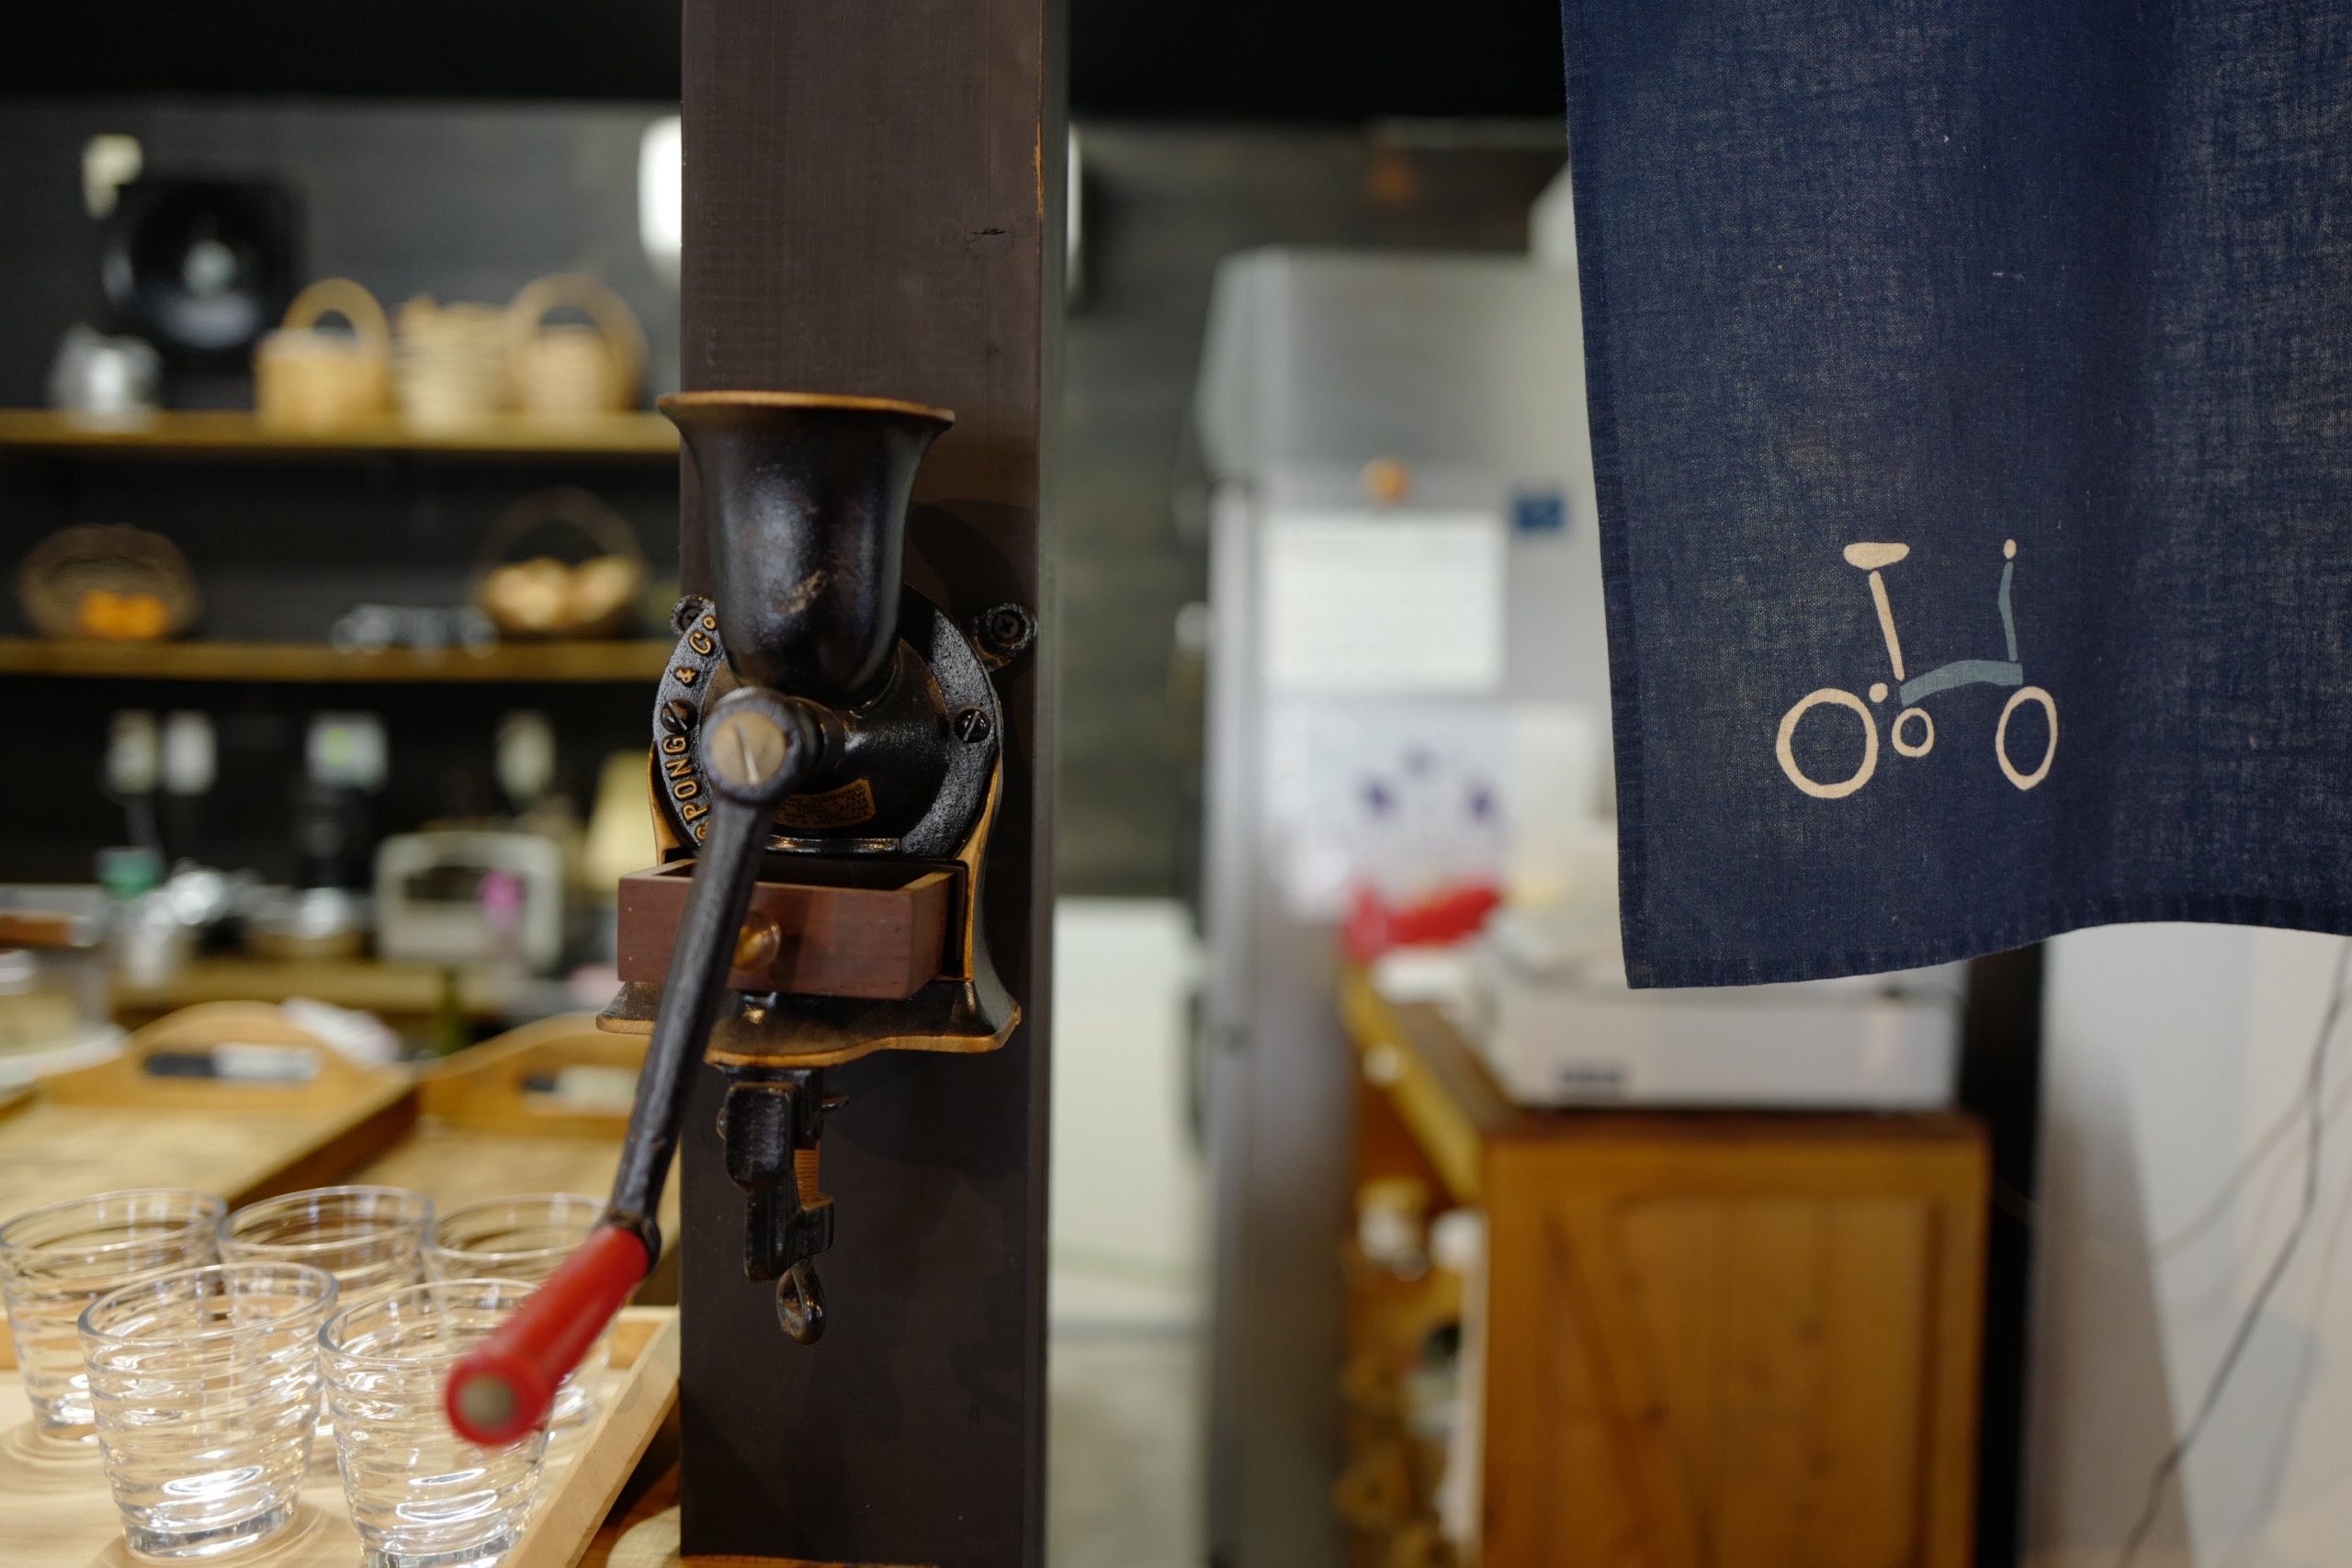 An old coffee grinder and a cloth curtain printed with the silhouette of a Brompton folding bicycle inside the cafe.